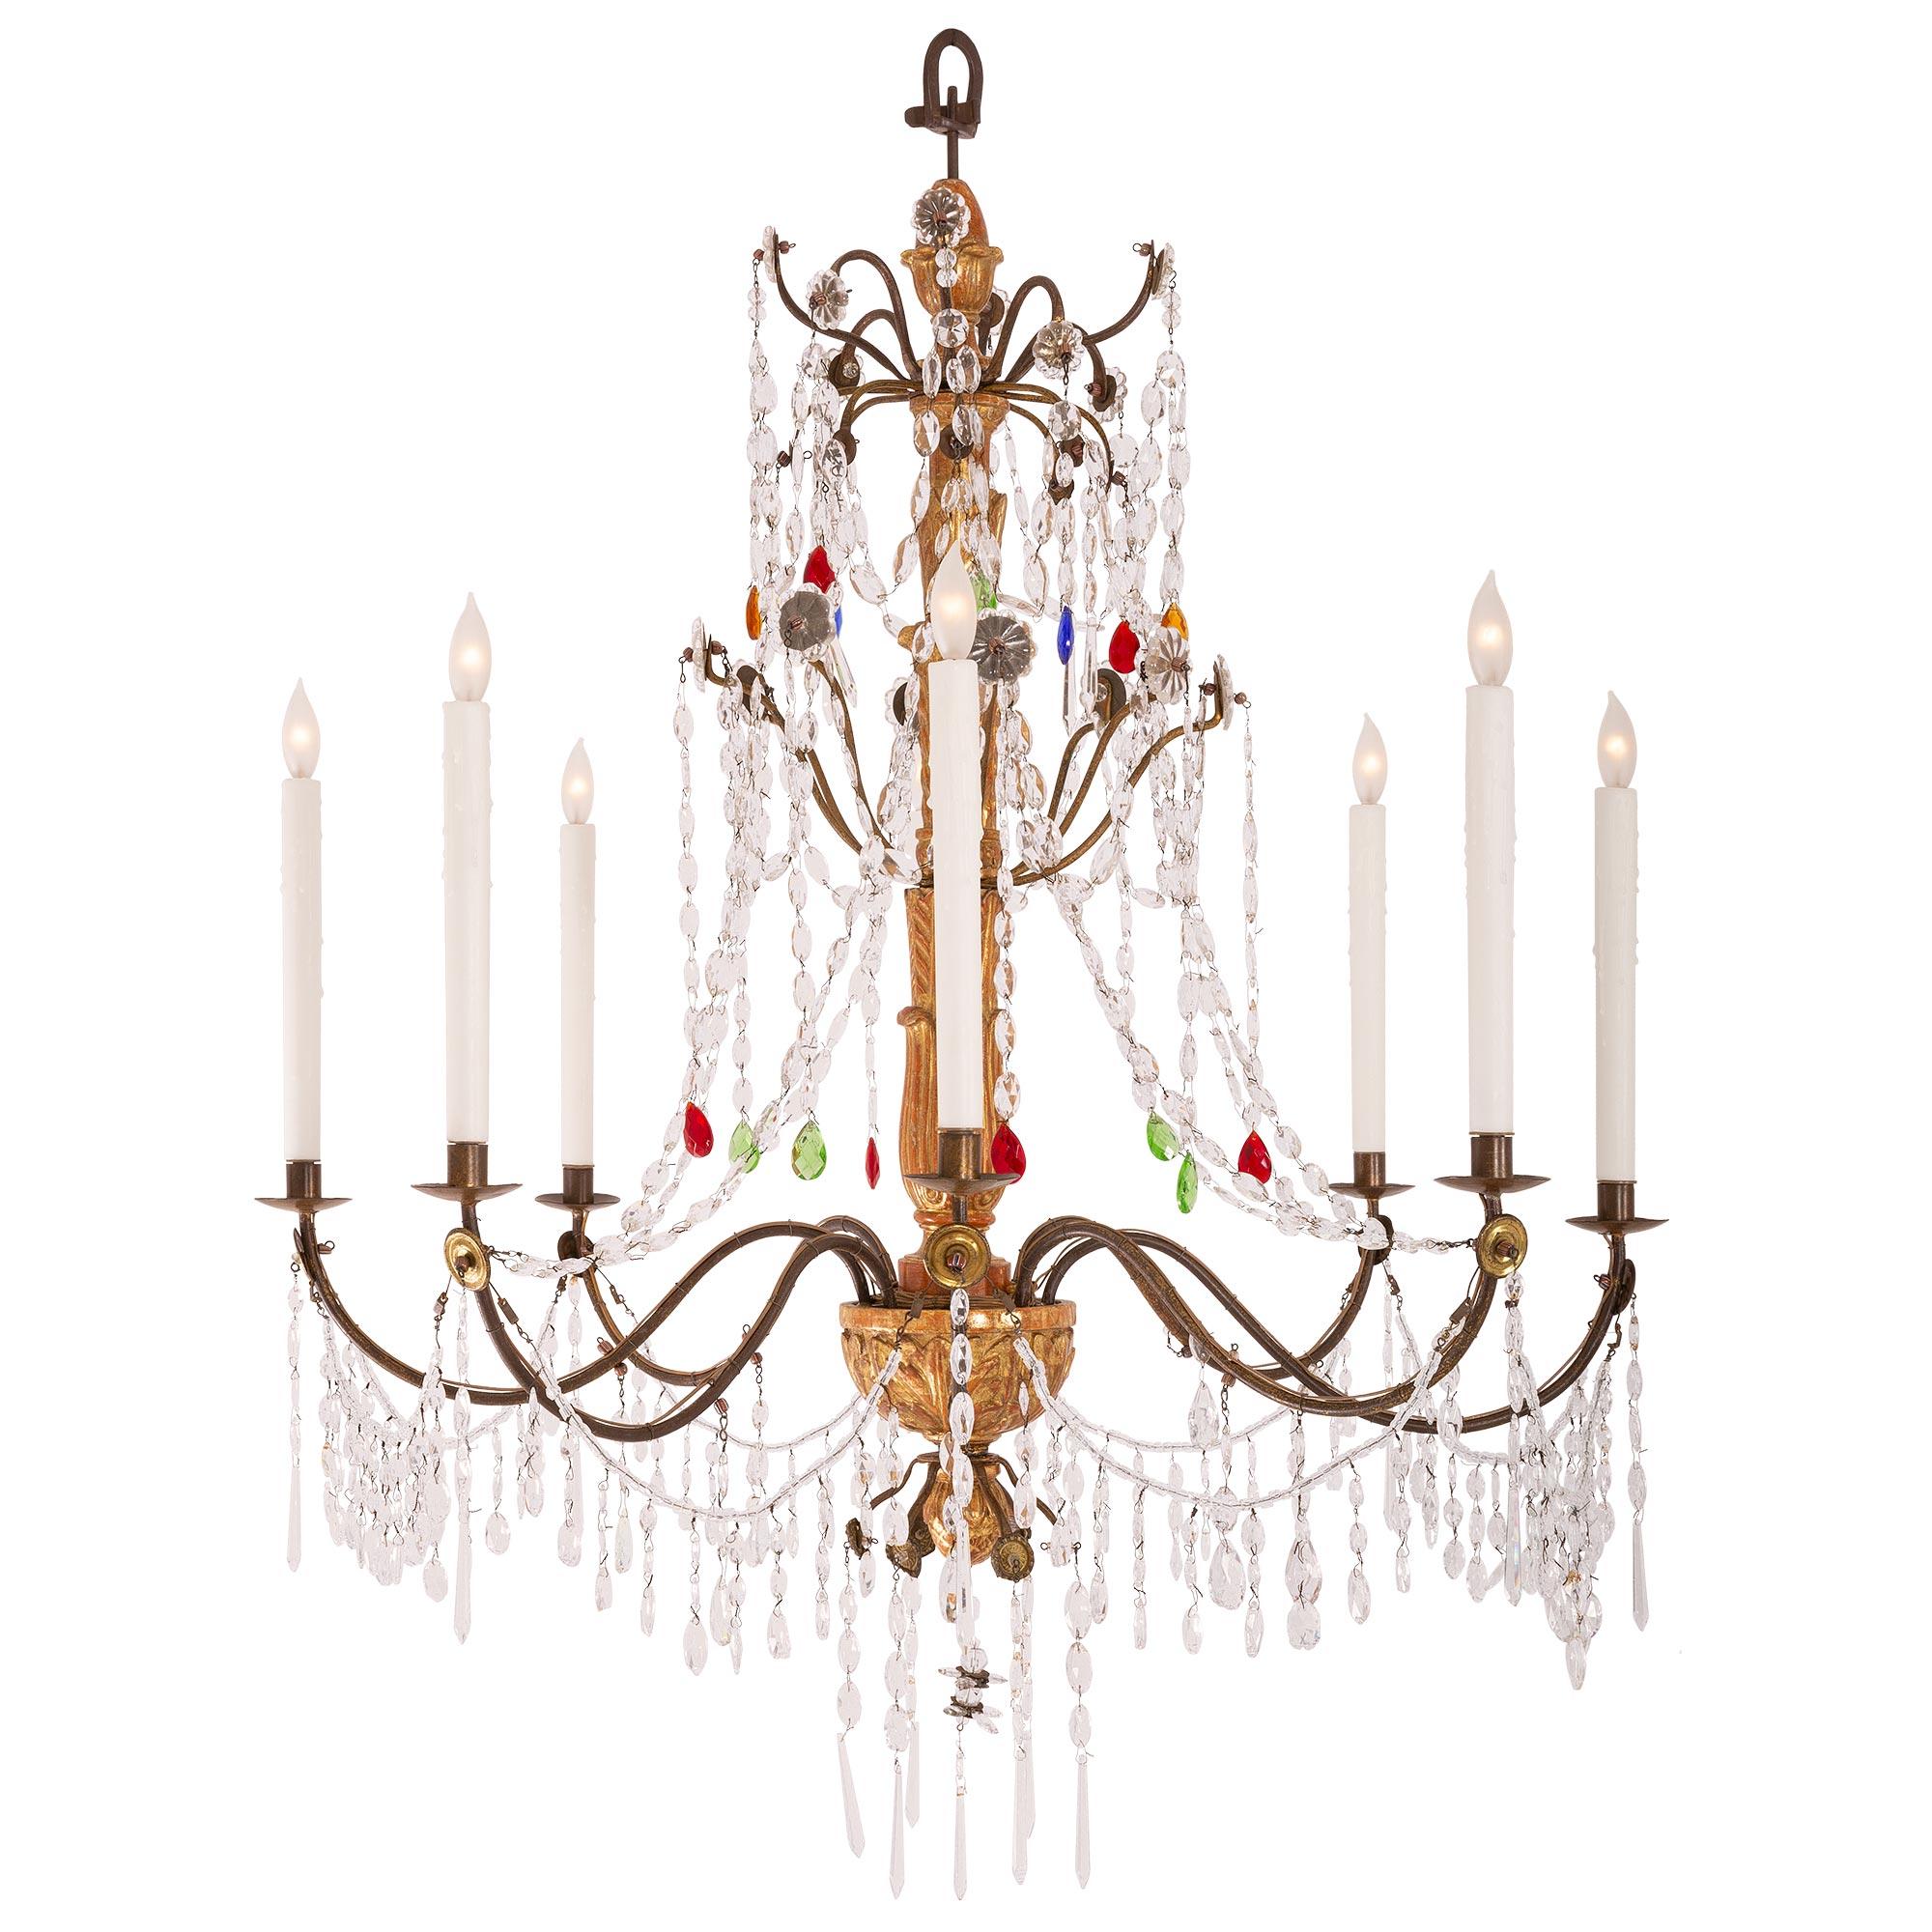 A beautiful Italian early 19th century Mecca, iron, crystal, and cut glass chandelier. The eight arm chandelier is centered by a lovely foliate finial centered by charming iron supports adorned with fine crystal pendants. At the center is a richly